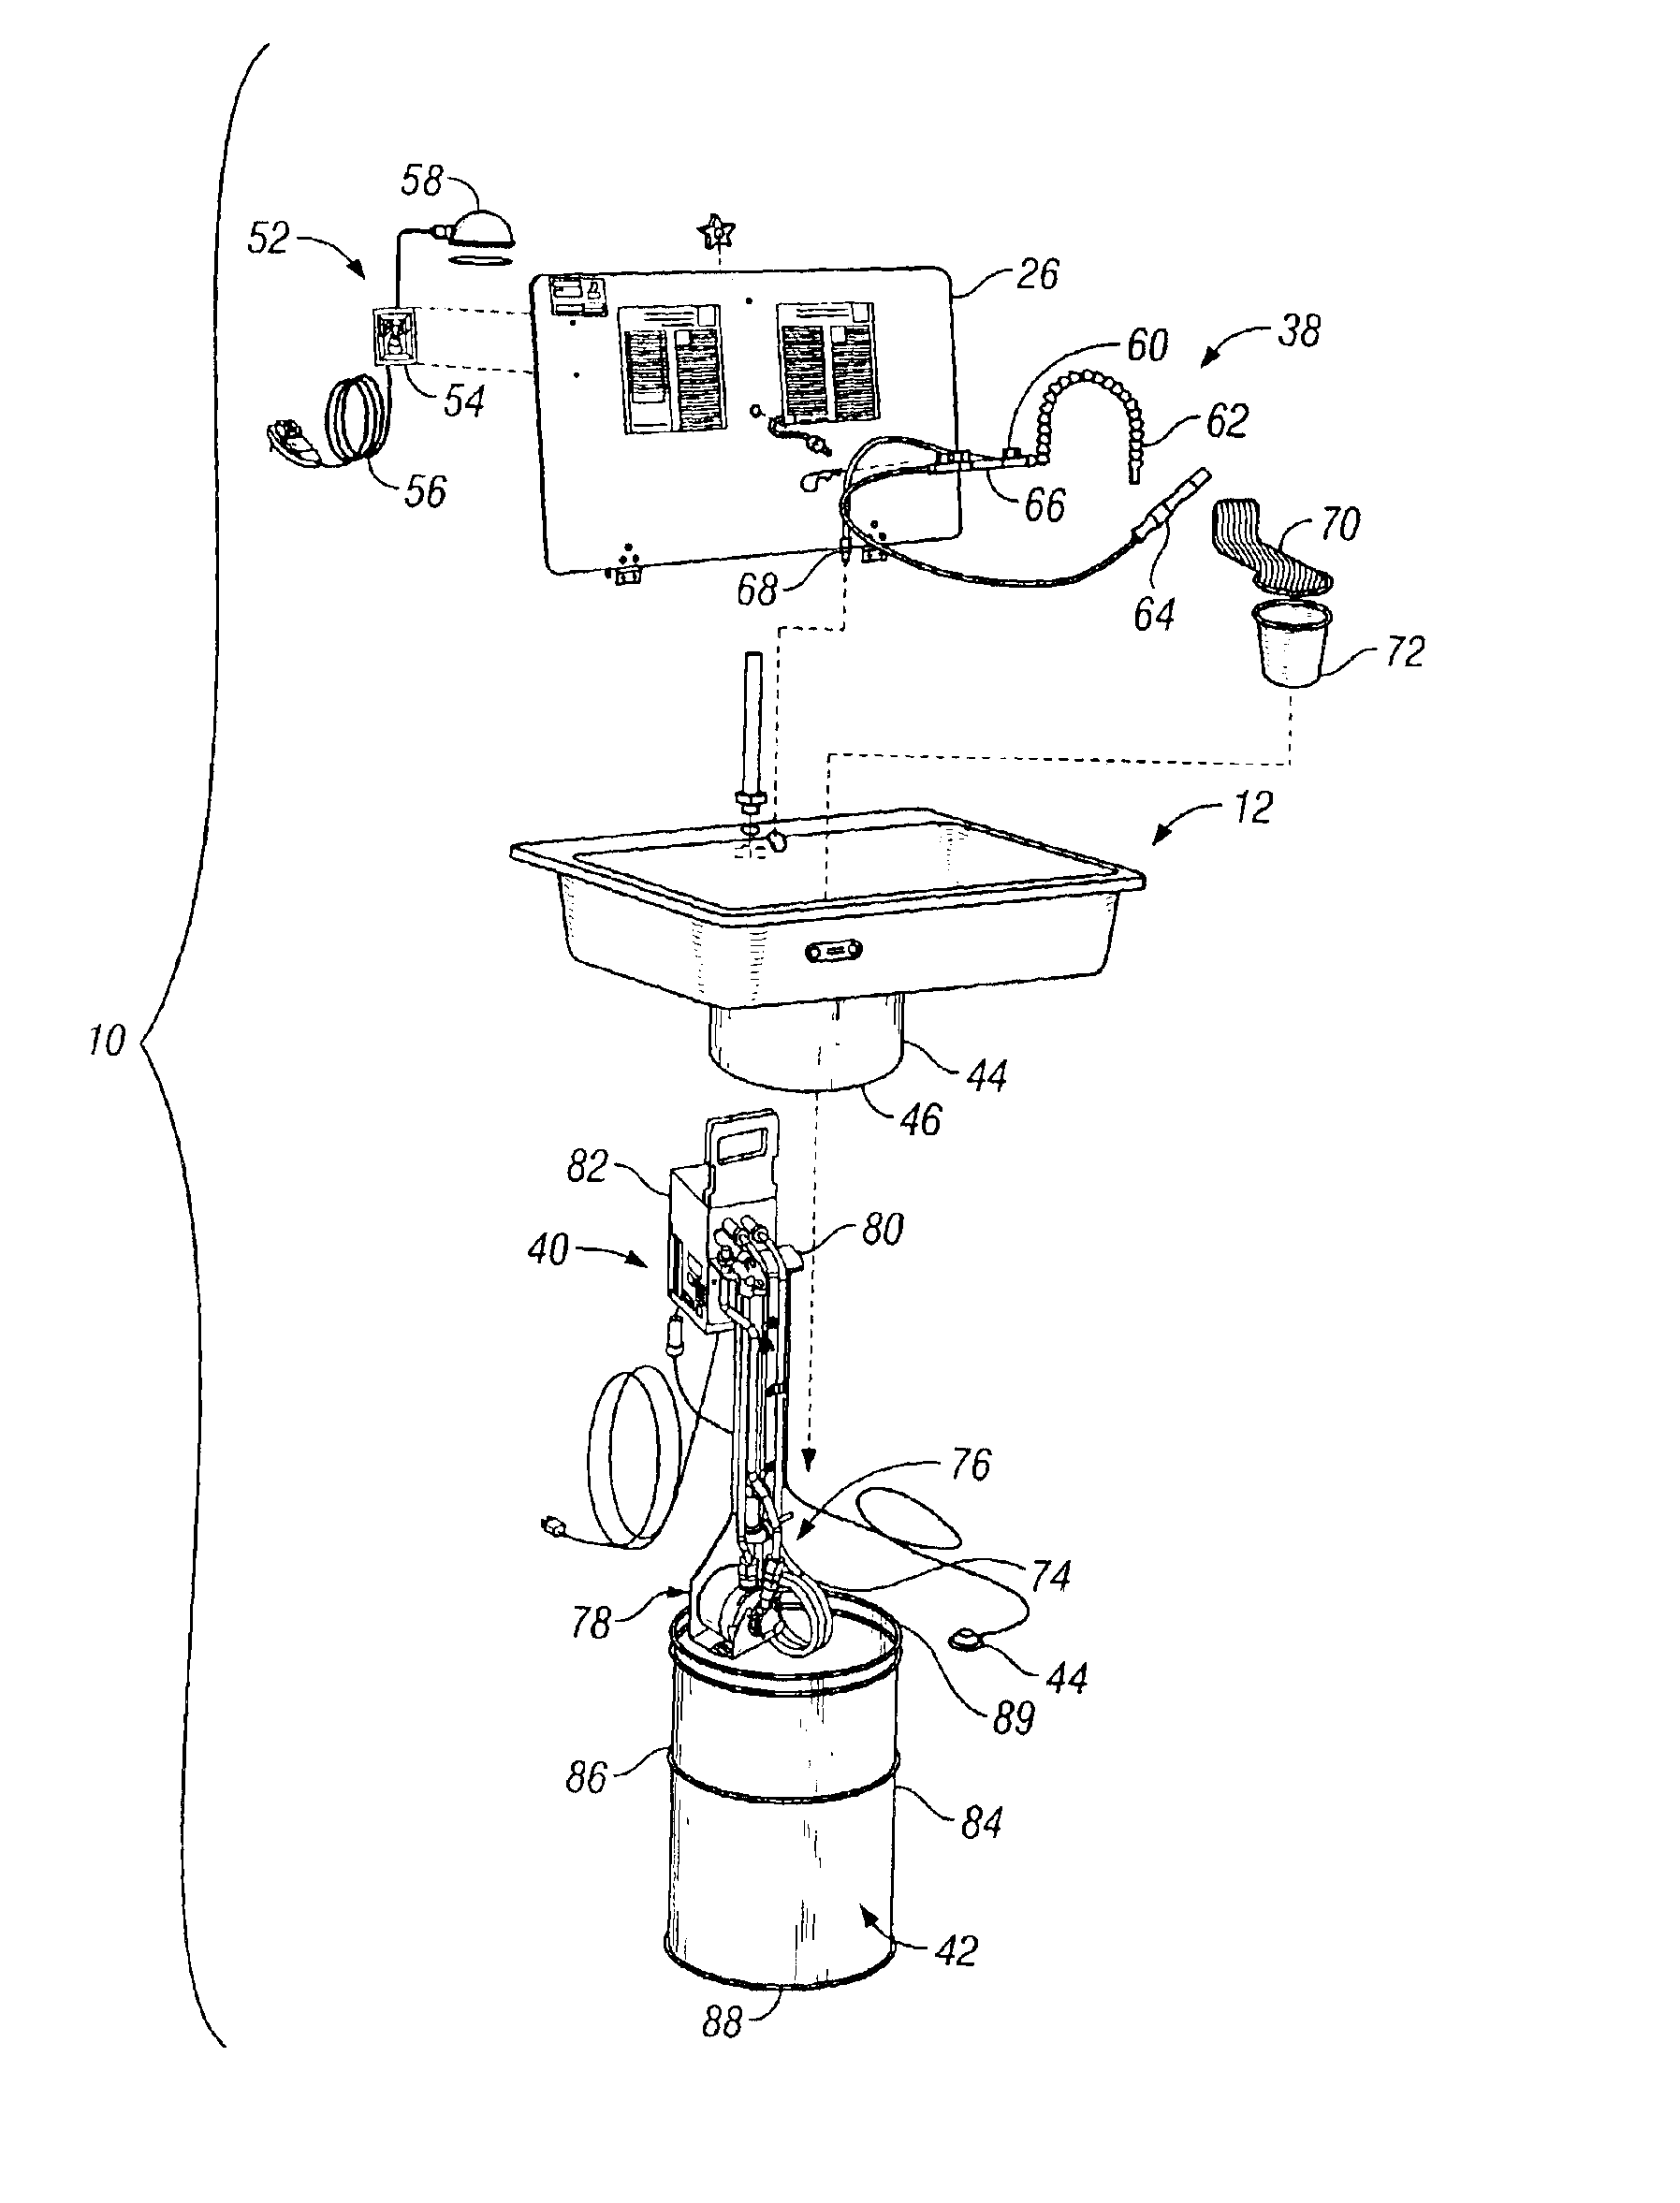 Parts washer with improved temperature and pump control